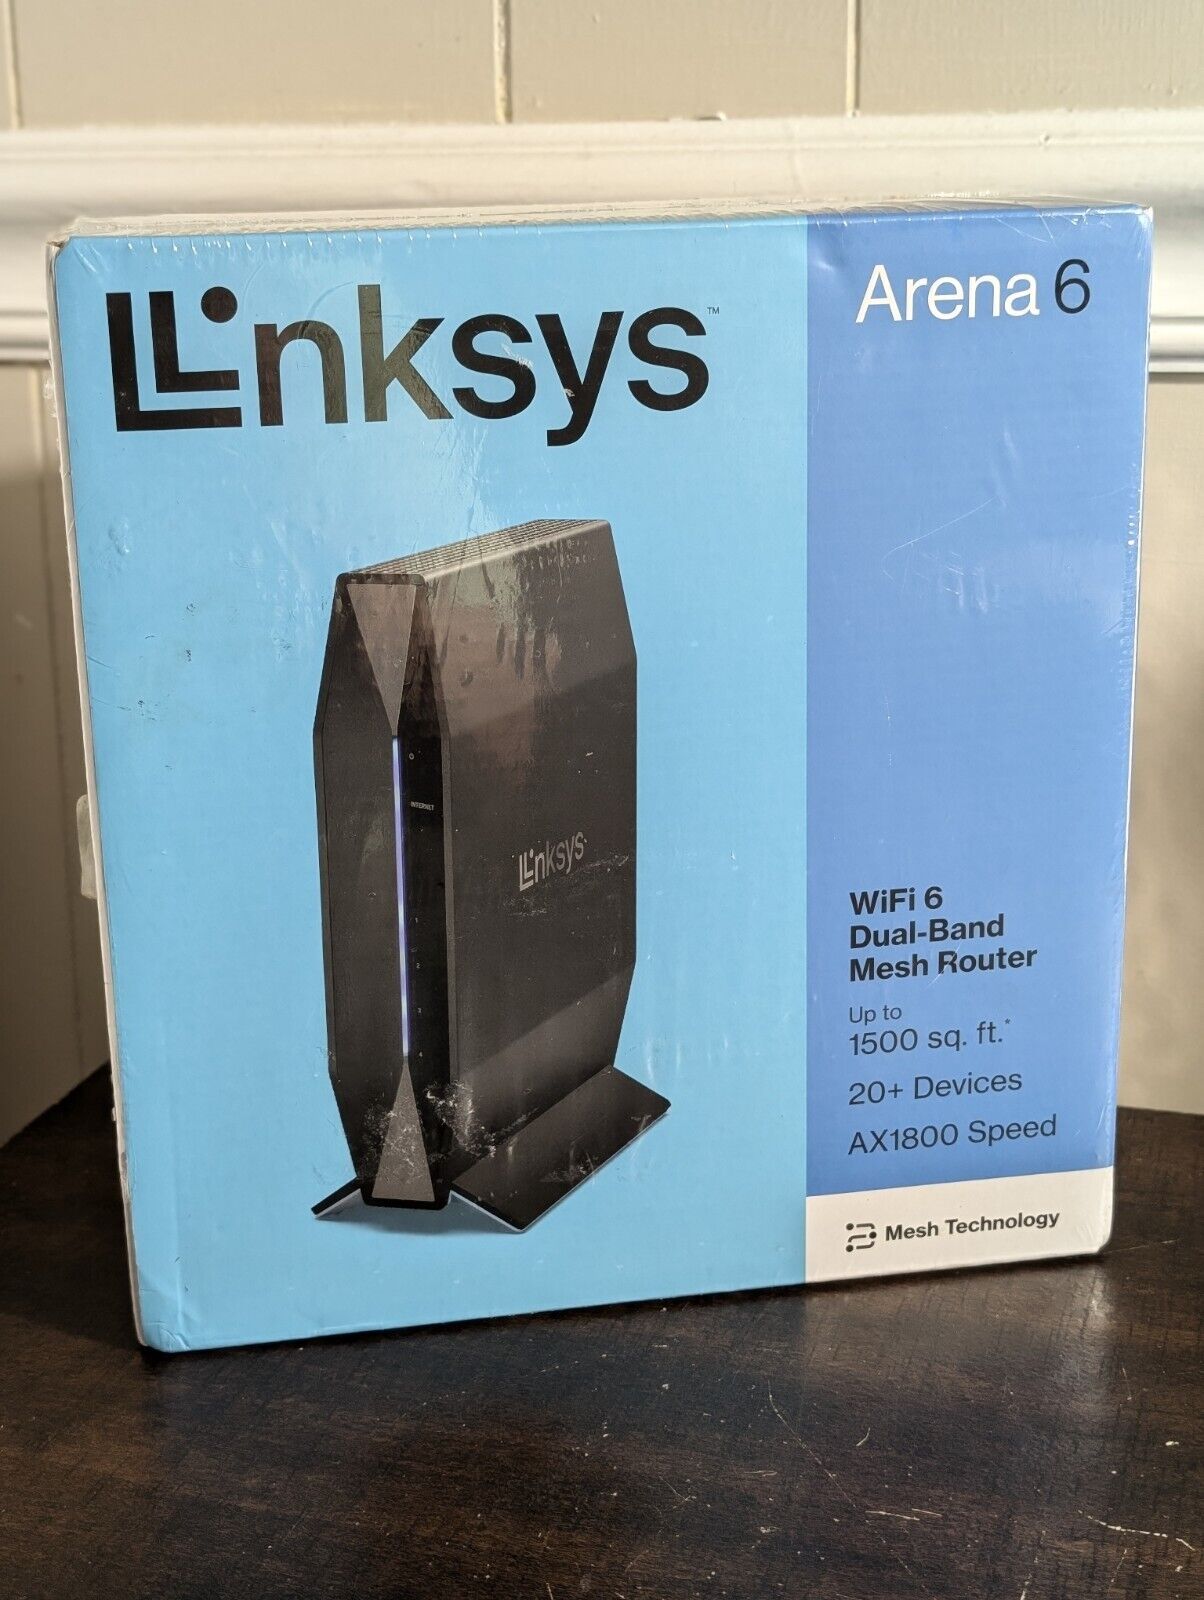 Linksys Arena 6 WiFi 6 Dual-Band Mesh Router New Sealed